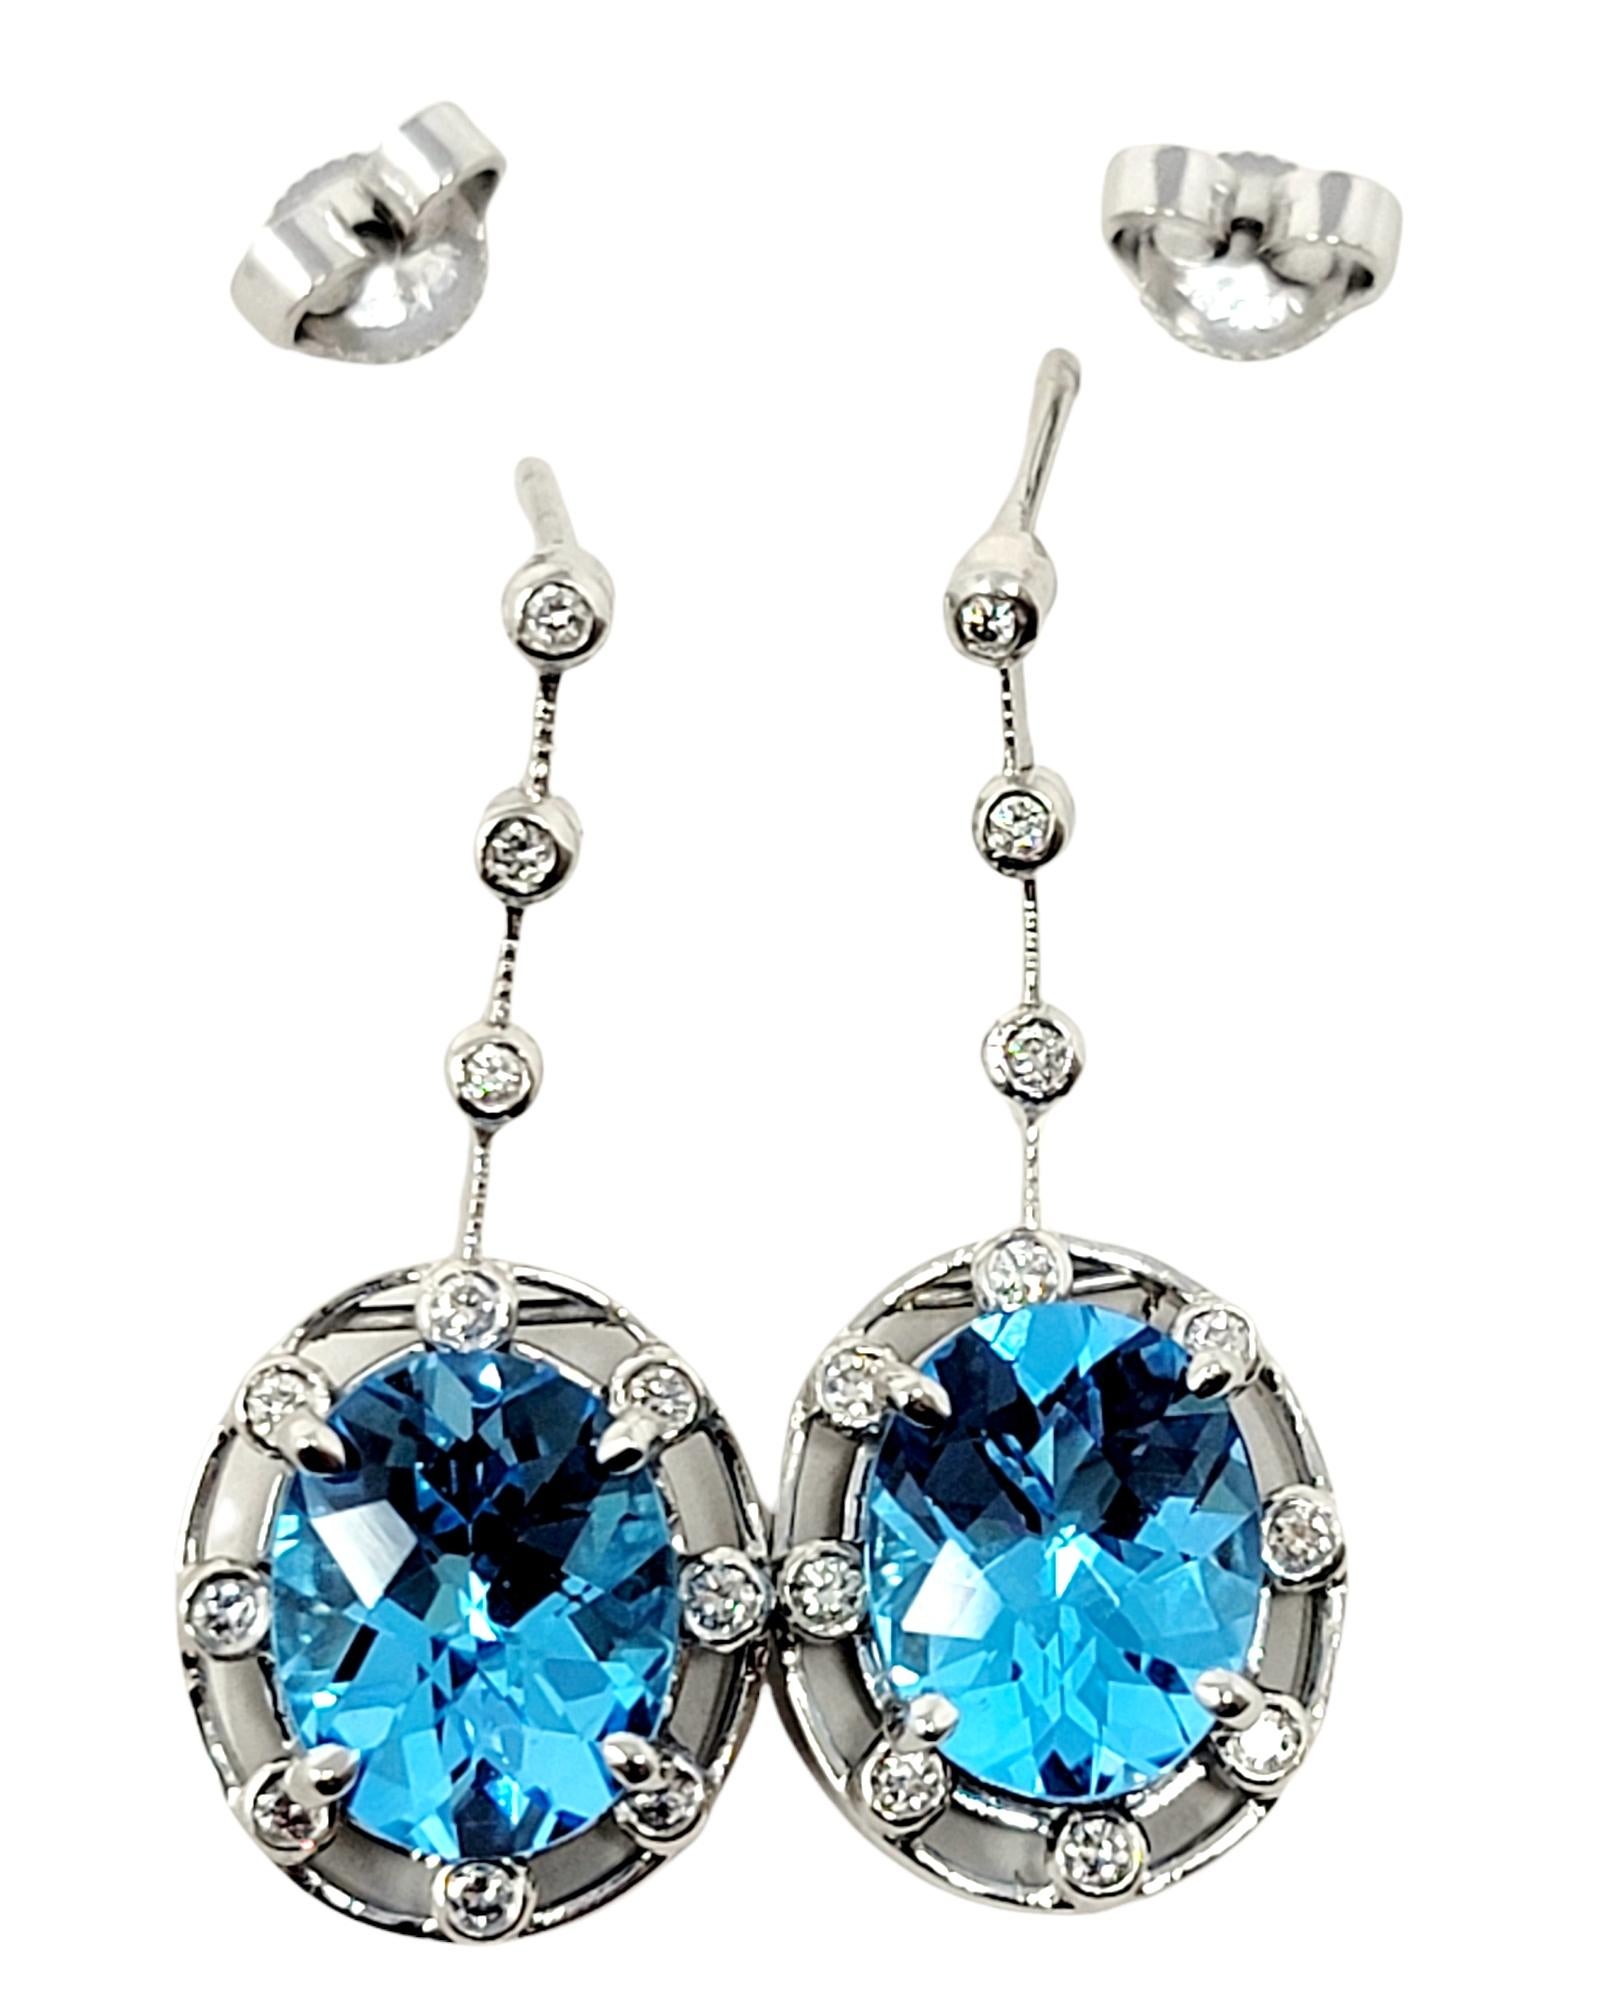 6.32 Carat Total Oval Cut Blue Topaz and Diamond Drop White Gold Dangle Earrings In Good Condition For Sale In Scottsdale, AZ